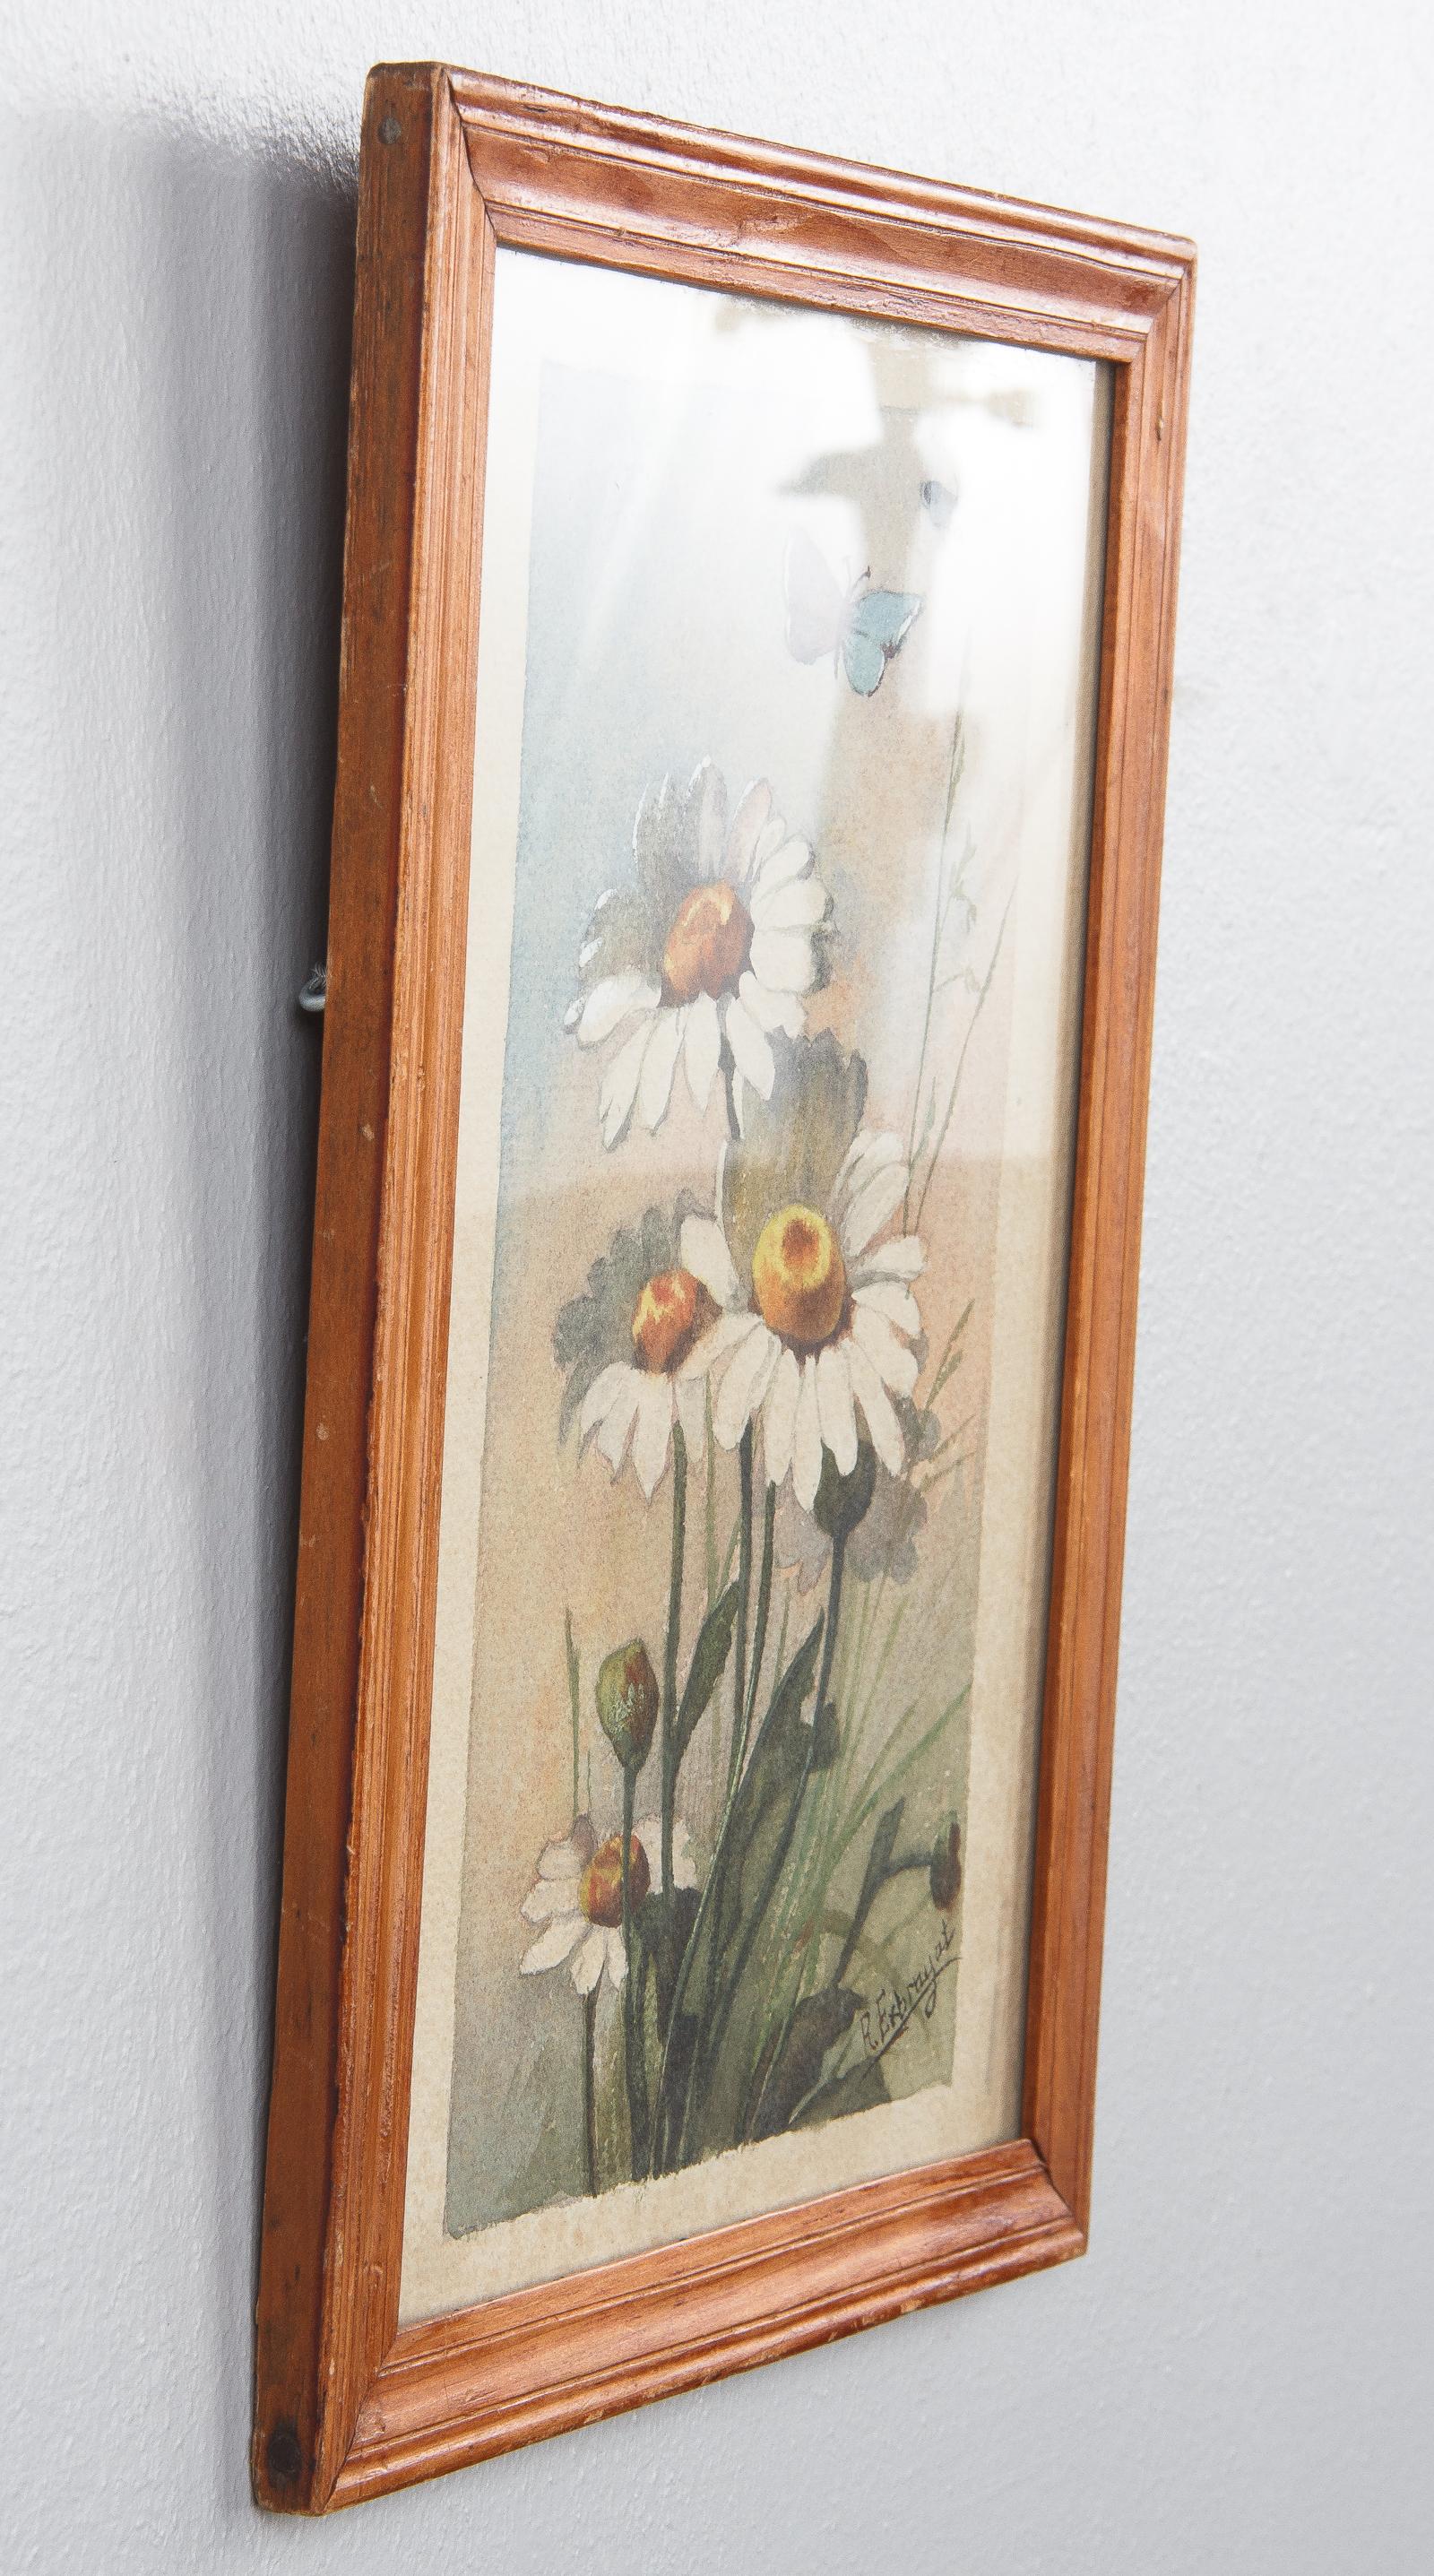 Hand-Painted French Oak Frame with Watercolor of Daisies by R. Exbrayat, 20th Century For Sale